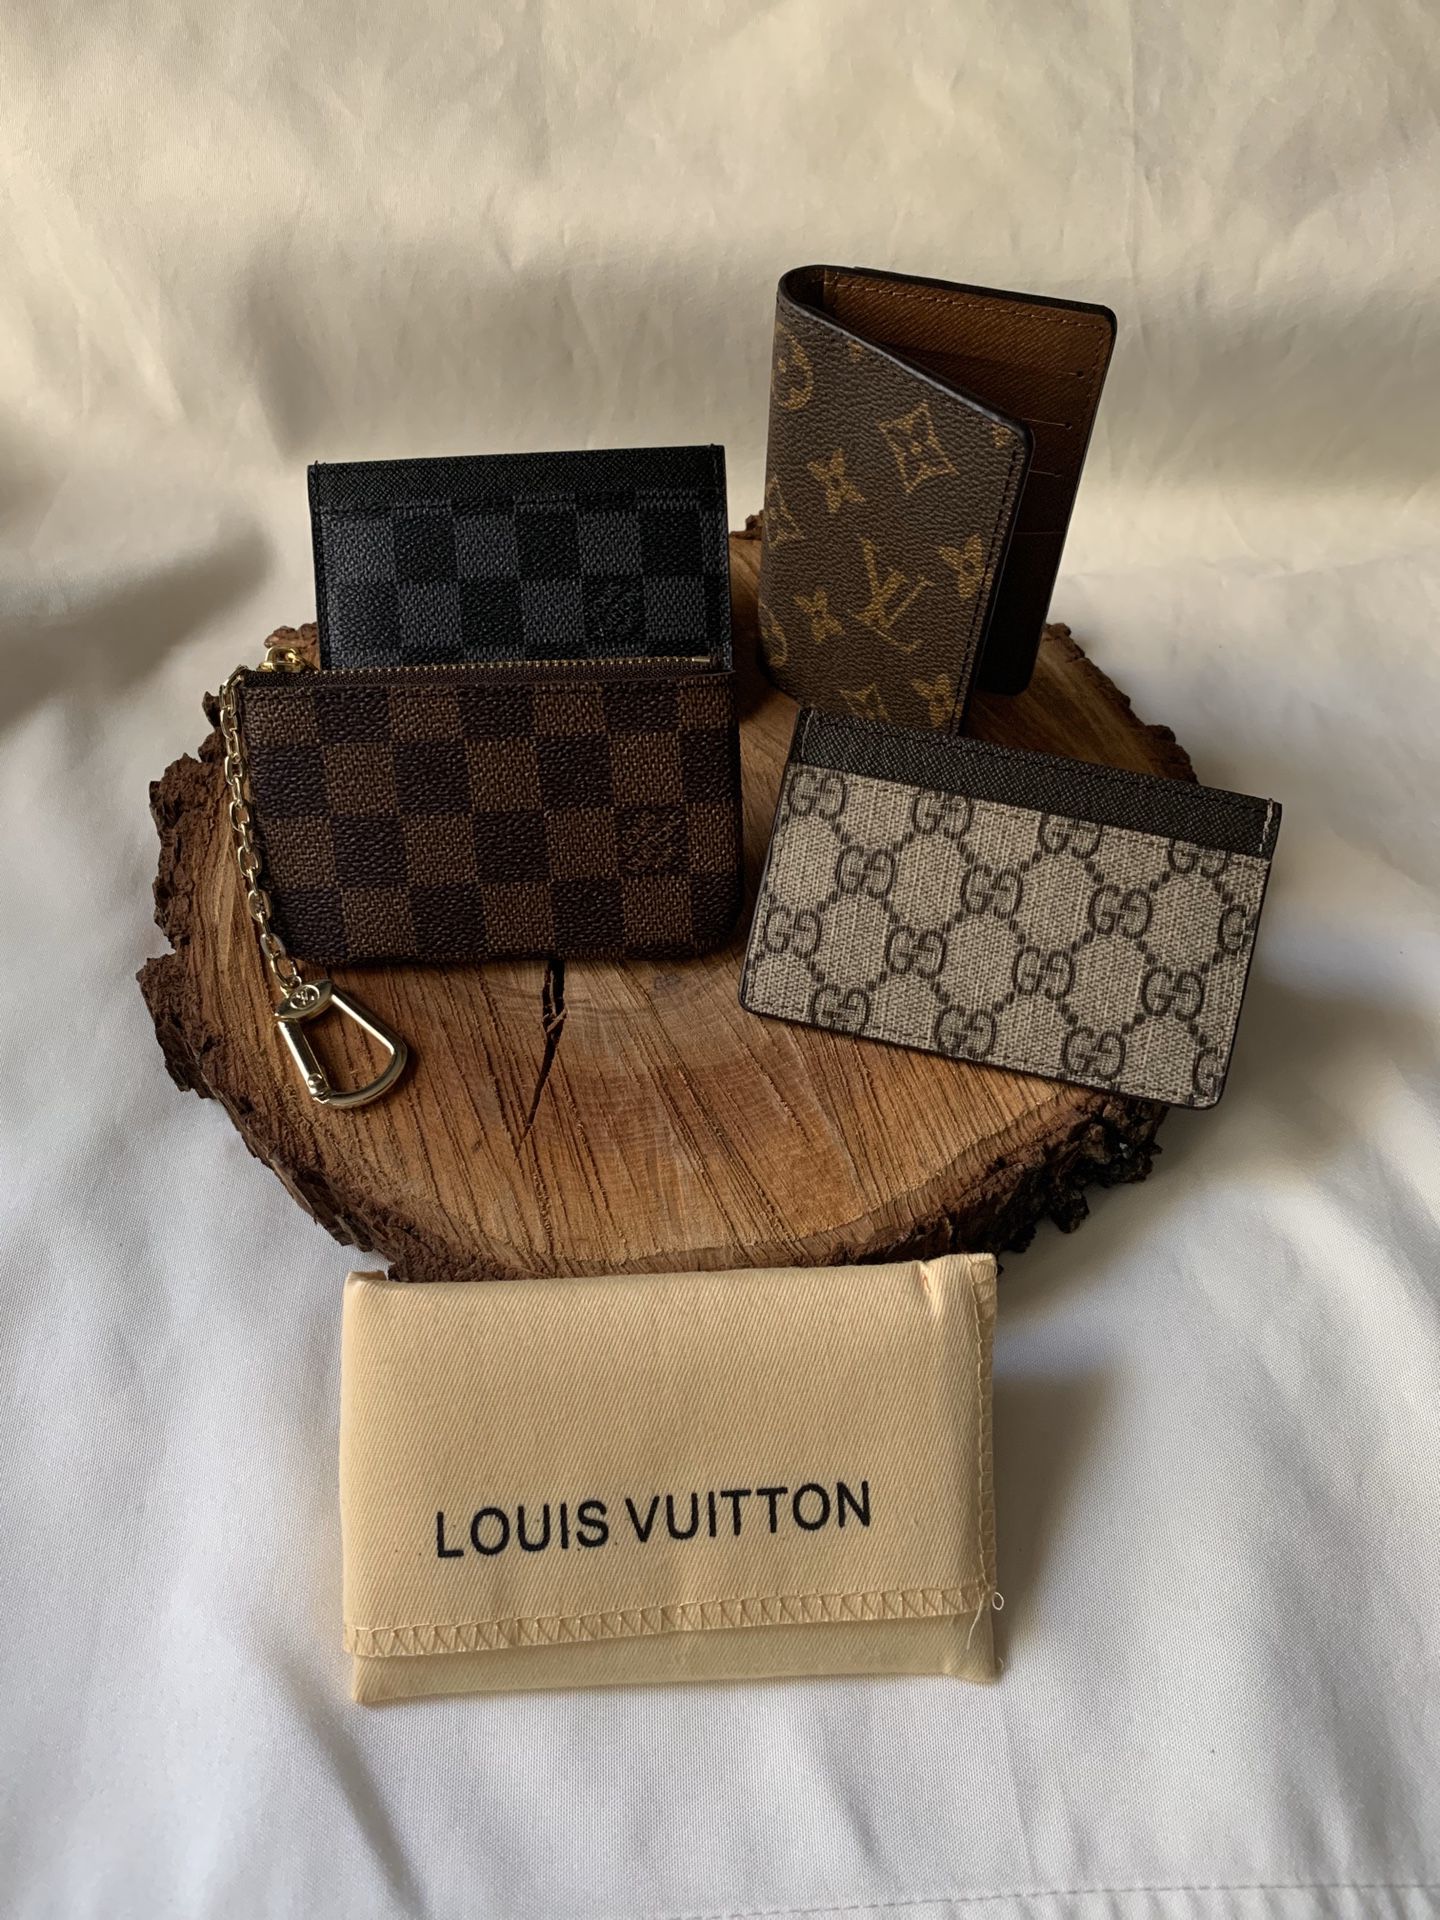 LV wallets and one Gucci Wallet !